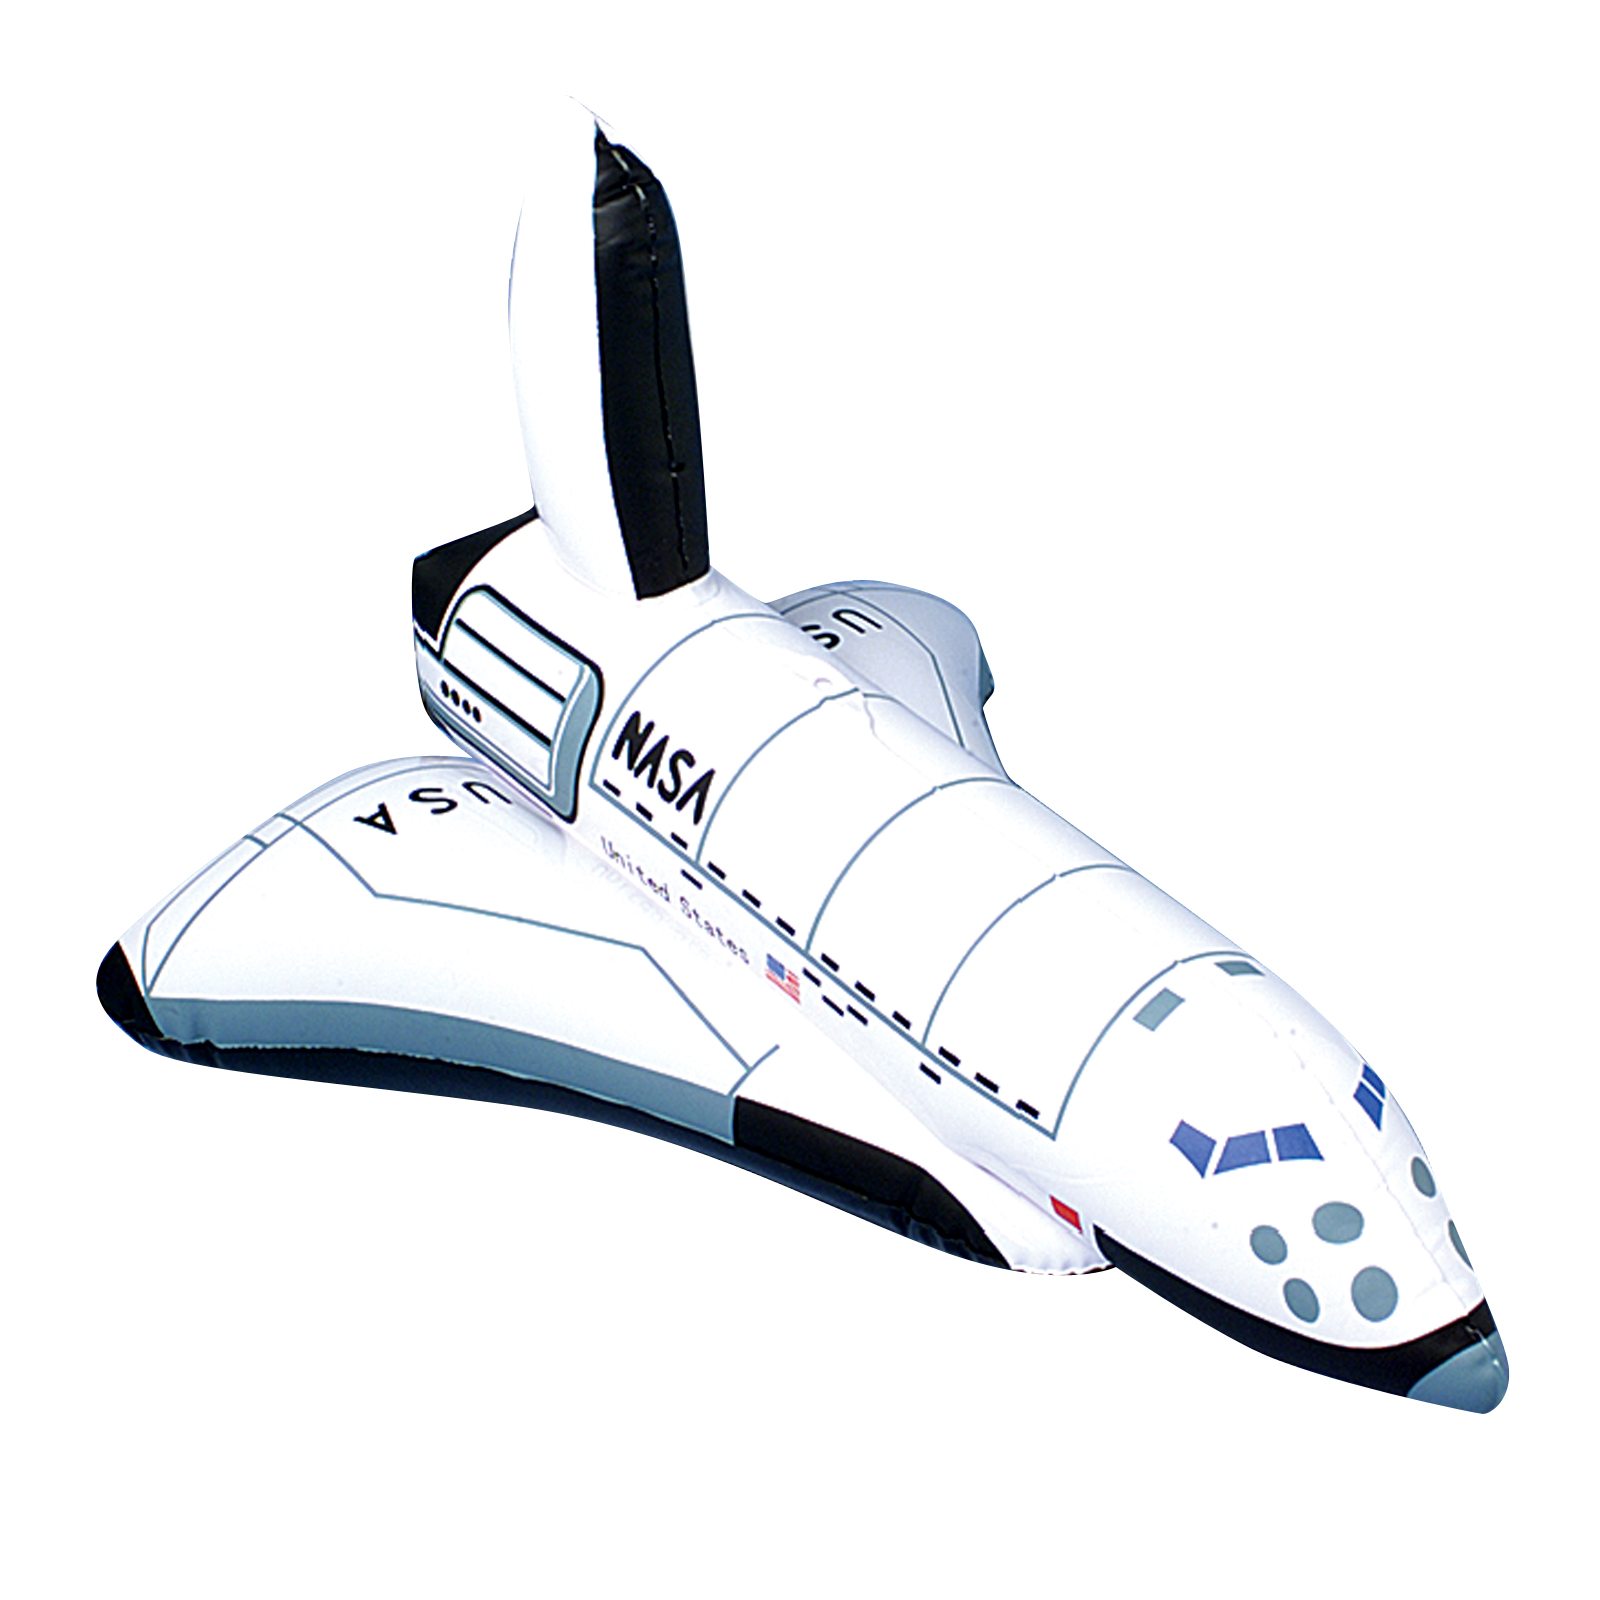 clipart space shuttle images - photo #40